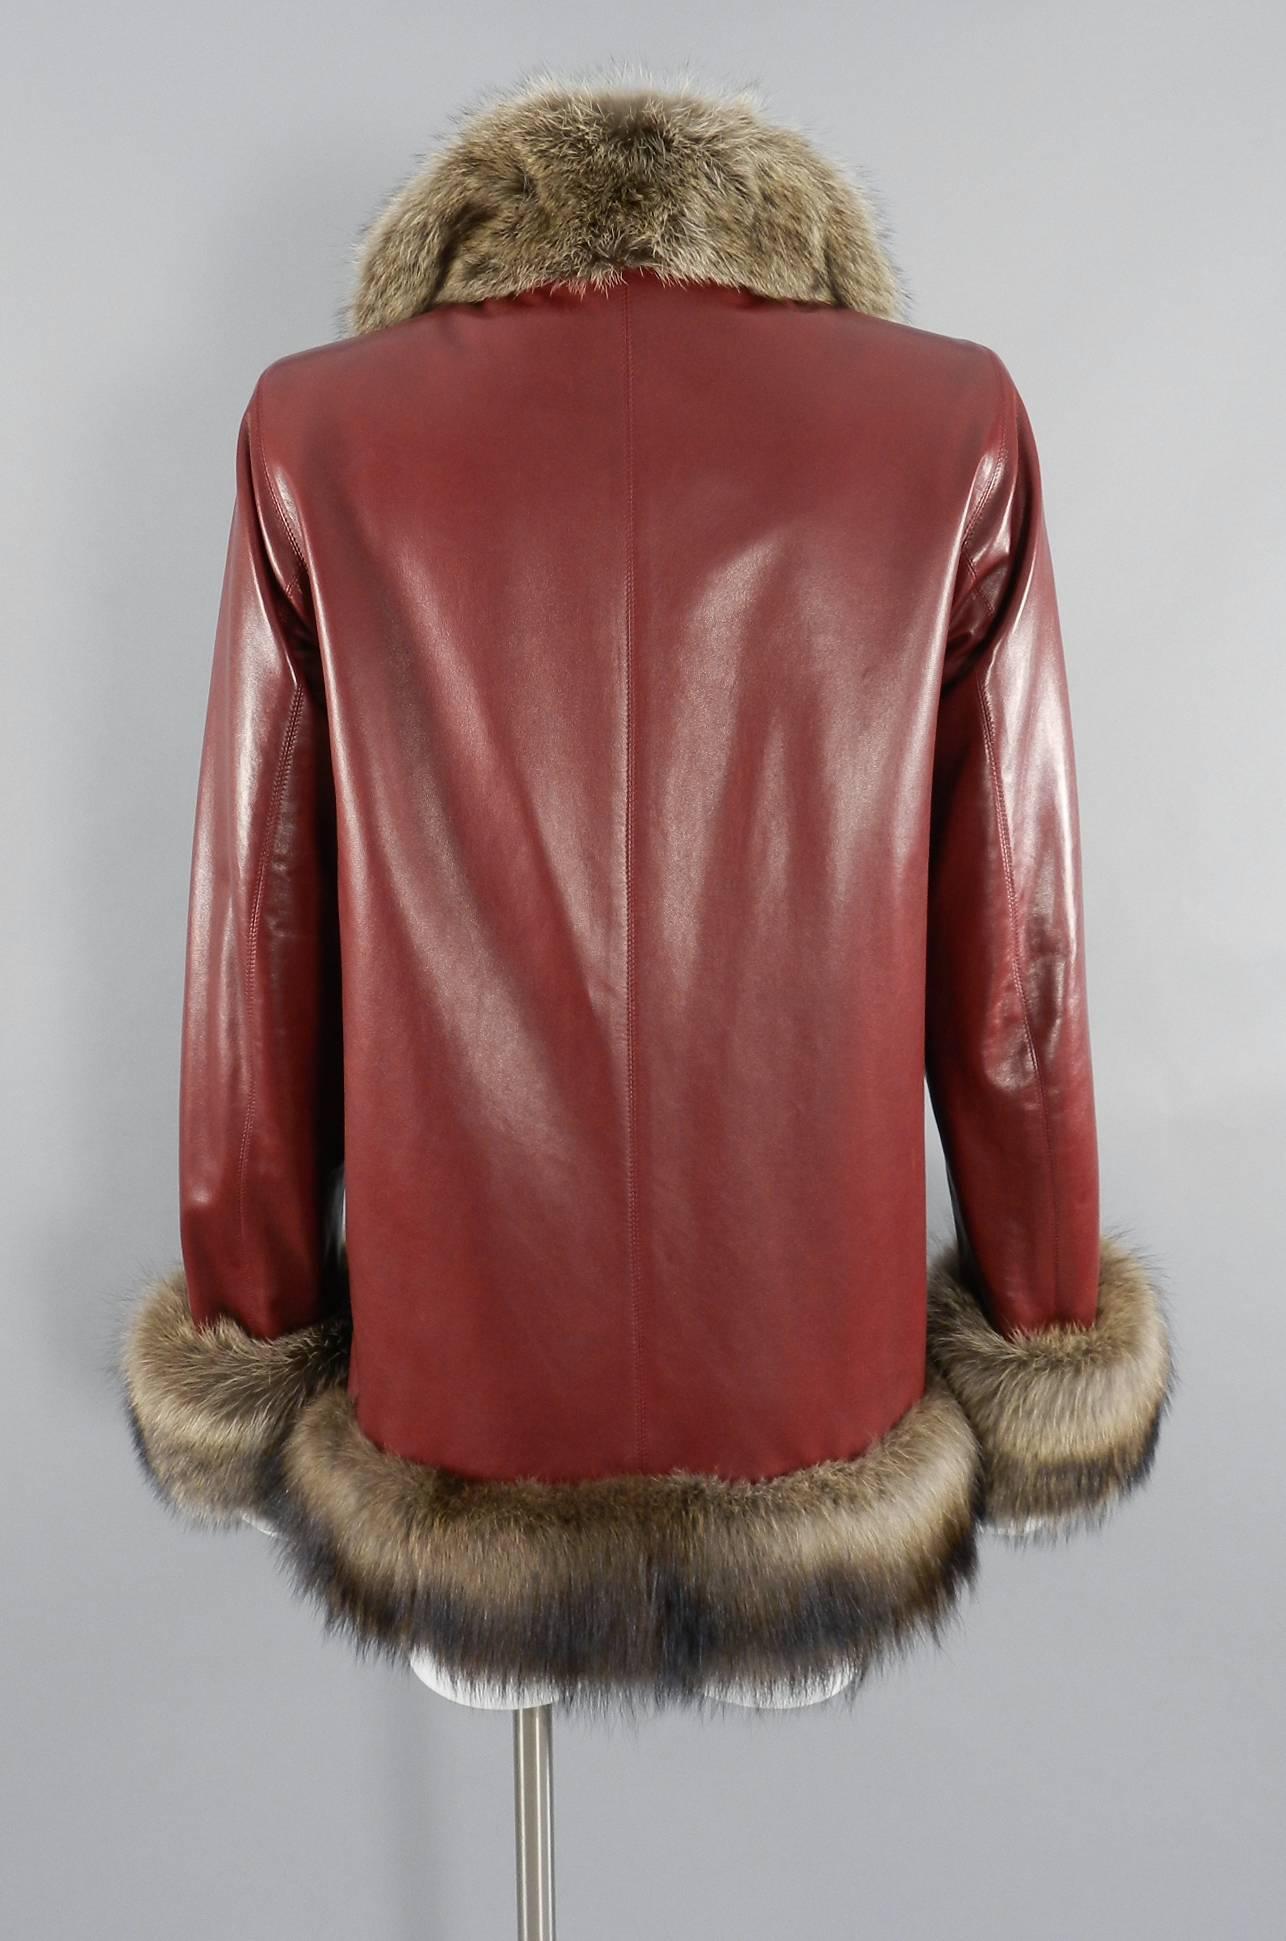 Women's Yves Saint Laurent vintage AW 1998 Haute Couture Red Leather Fisher Fur Coat